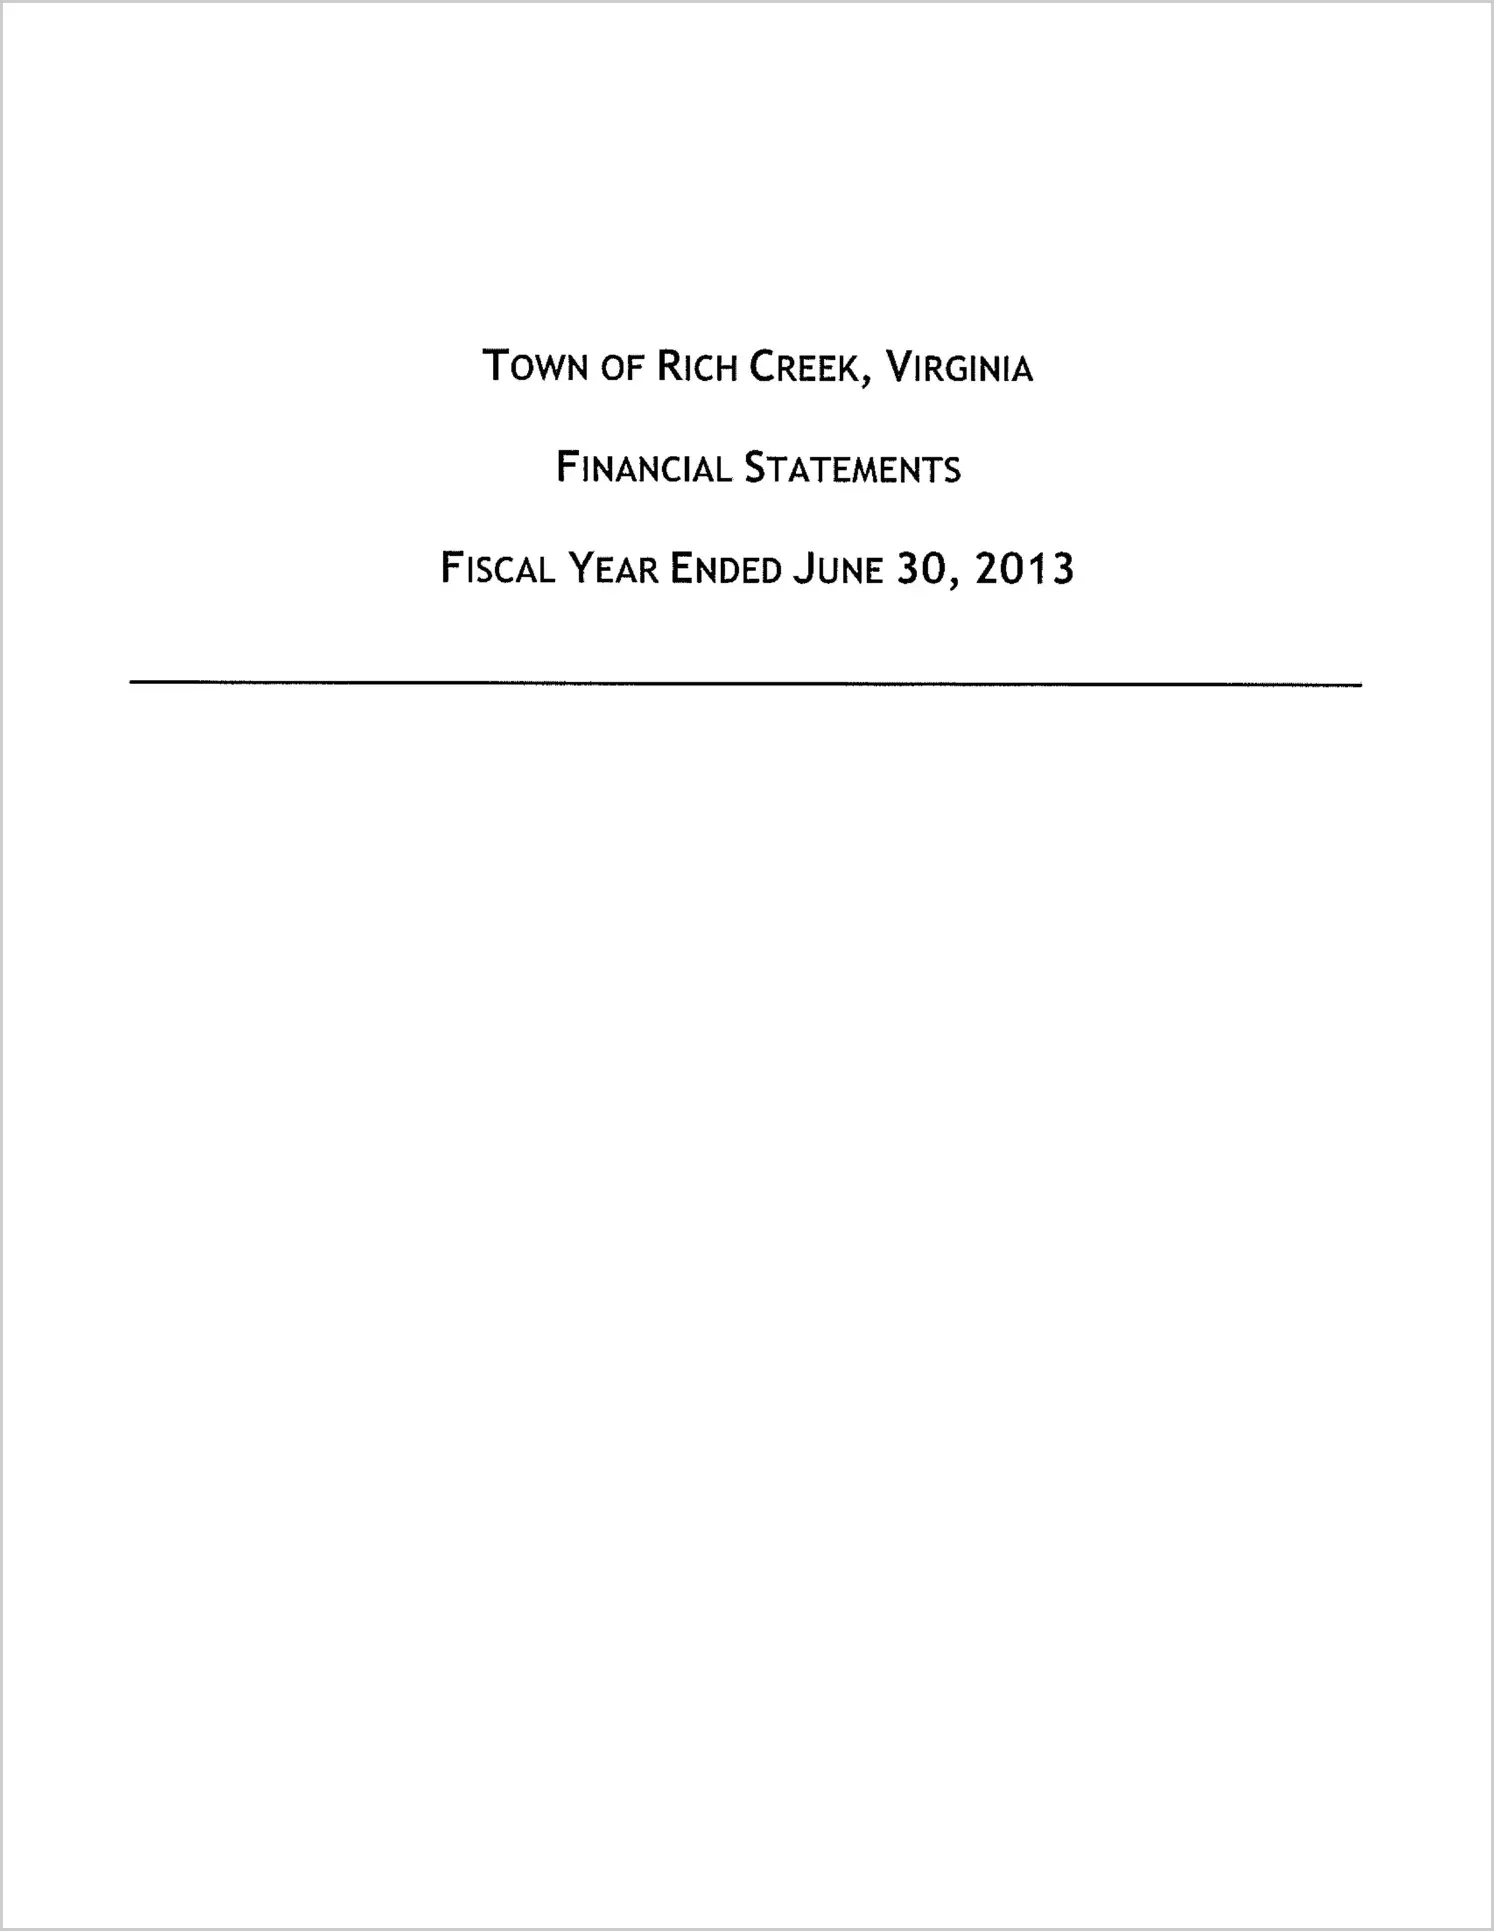 2013 Annual Financial Report for Town of Rich Creek